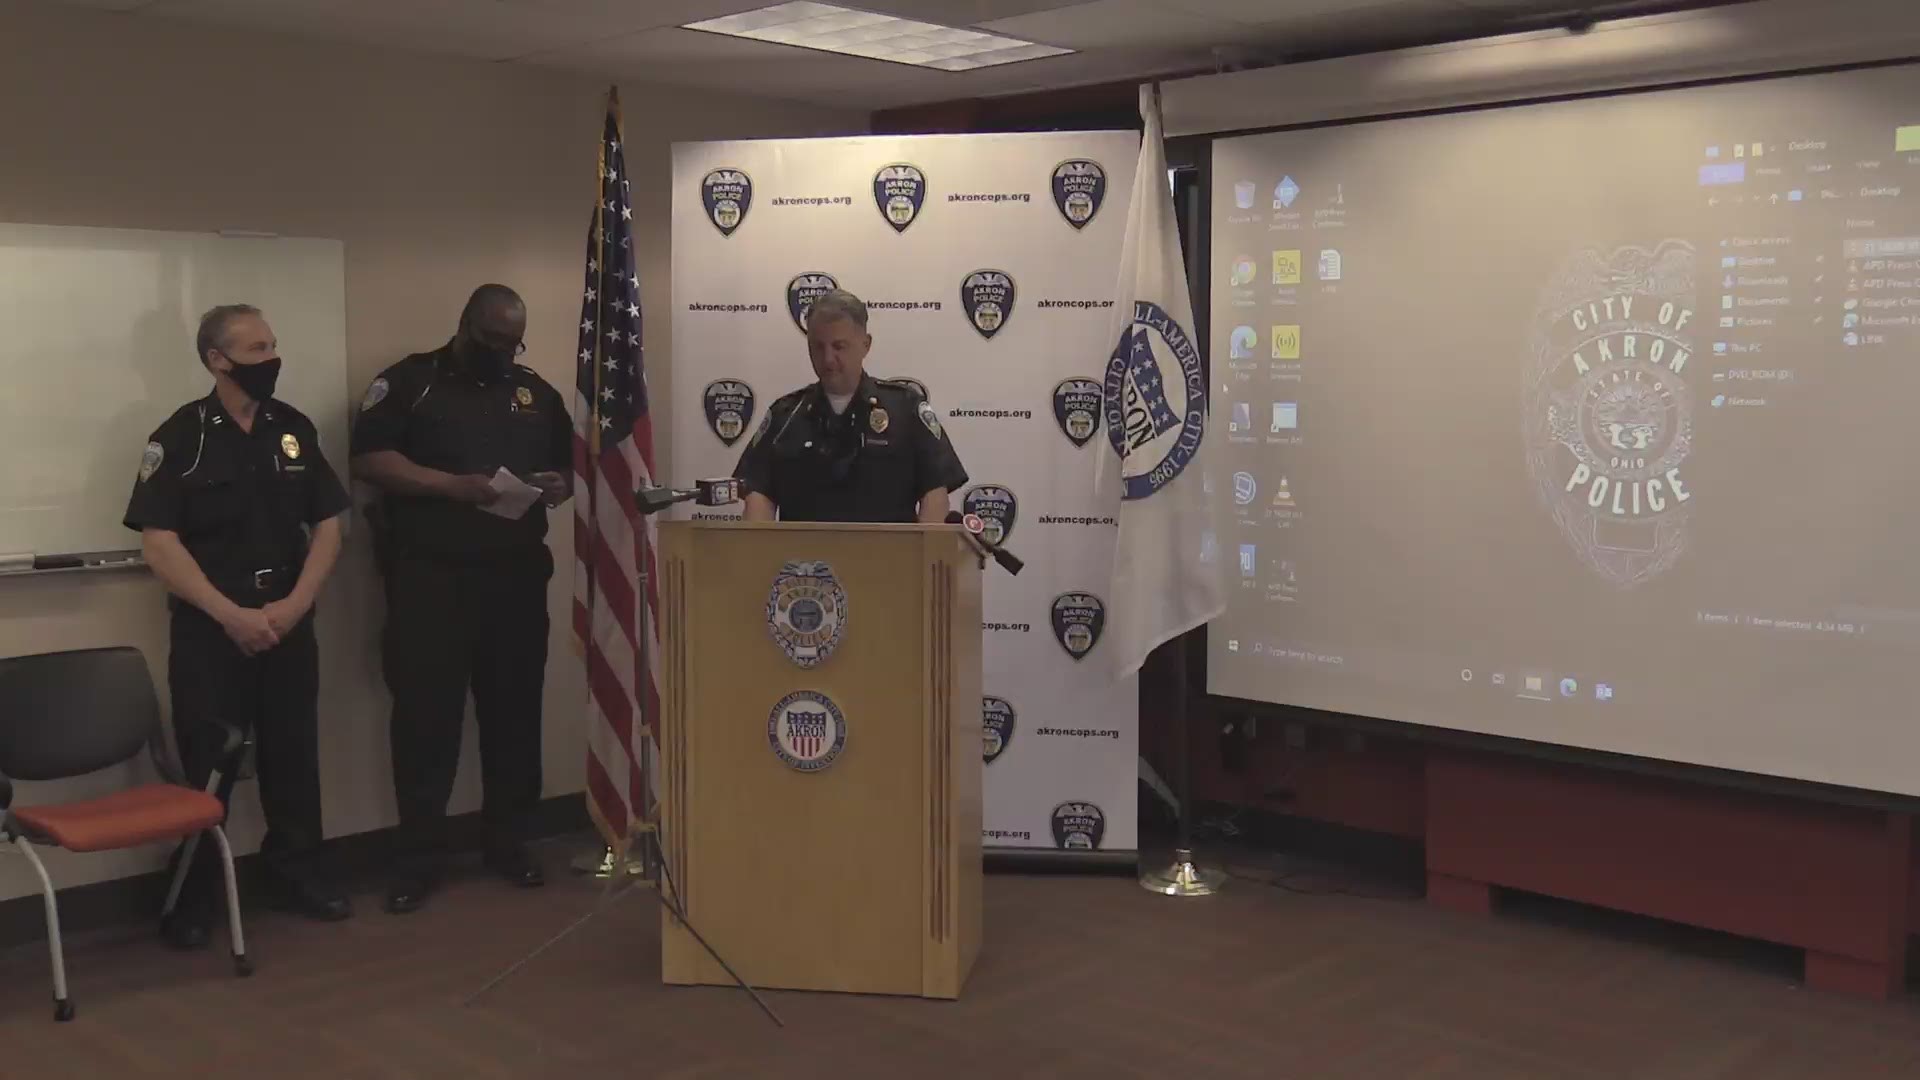 In a press conference, the Akron police determined it was not appropriate based on the circumstances officers were presented with.